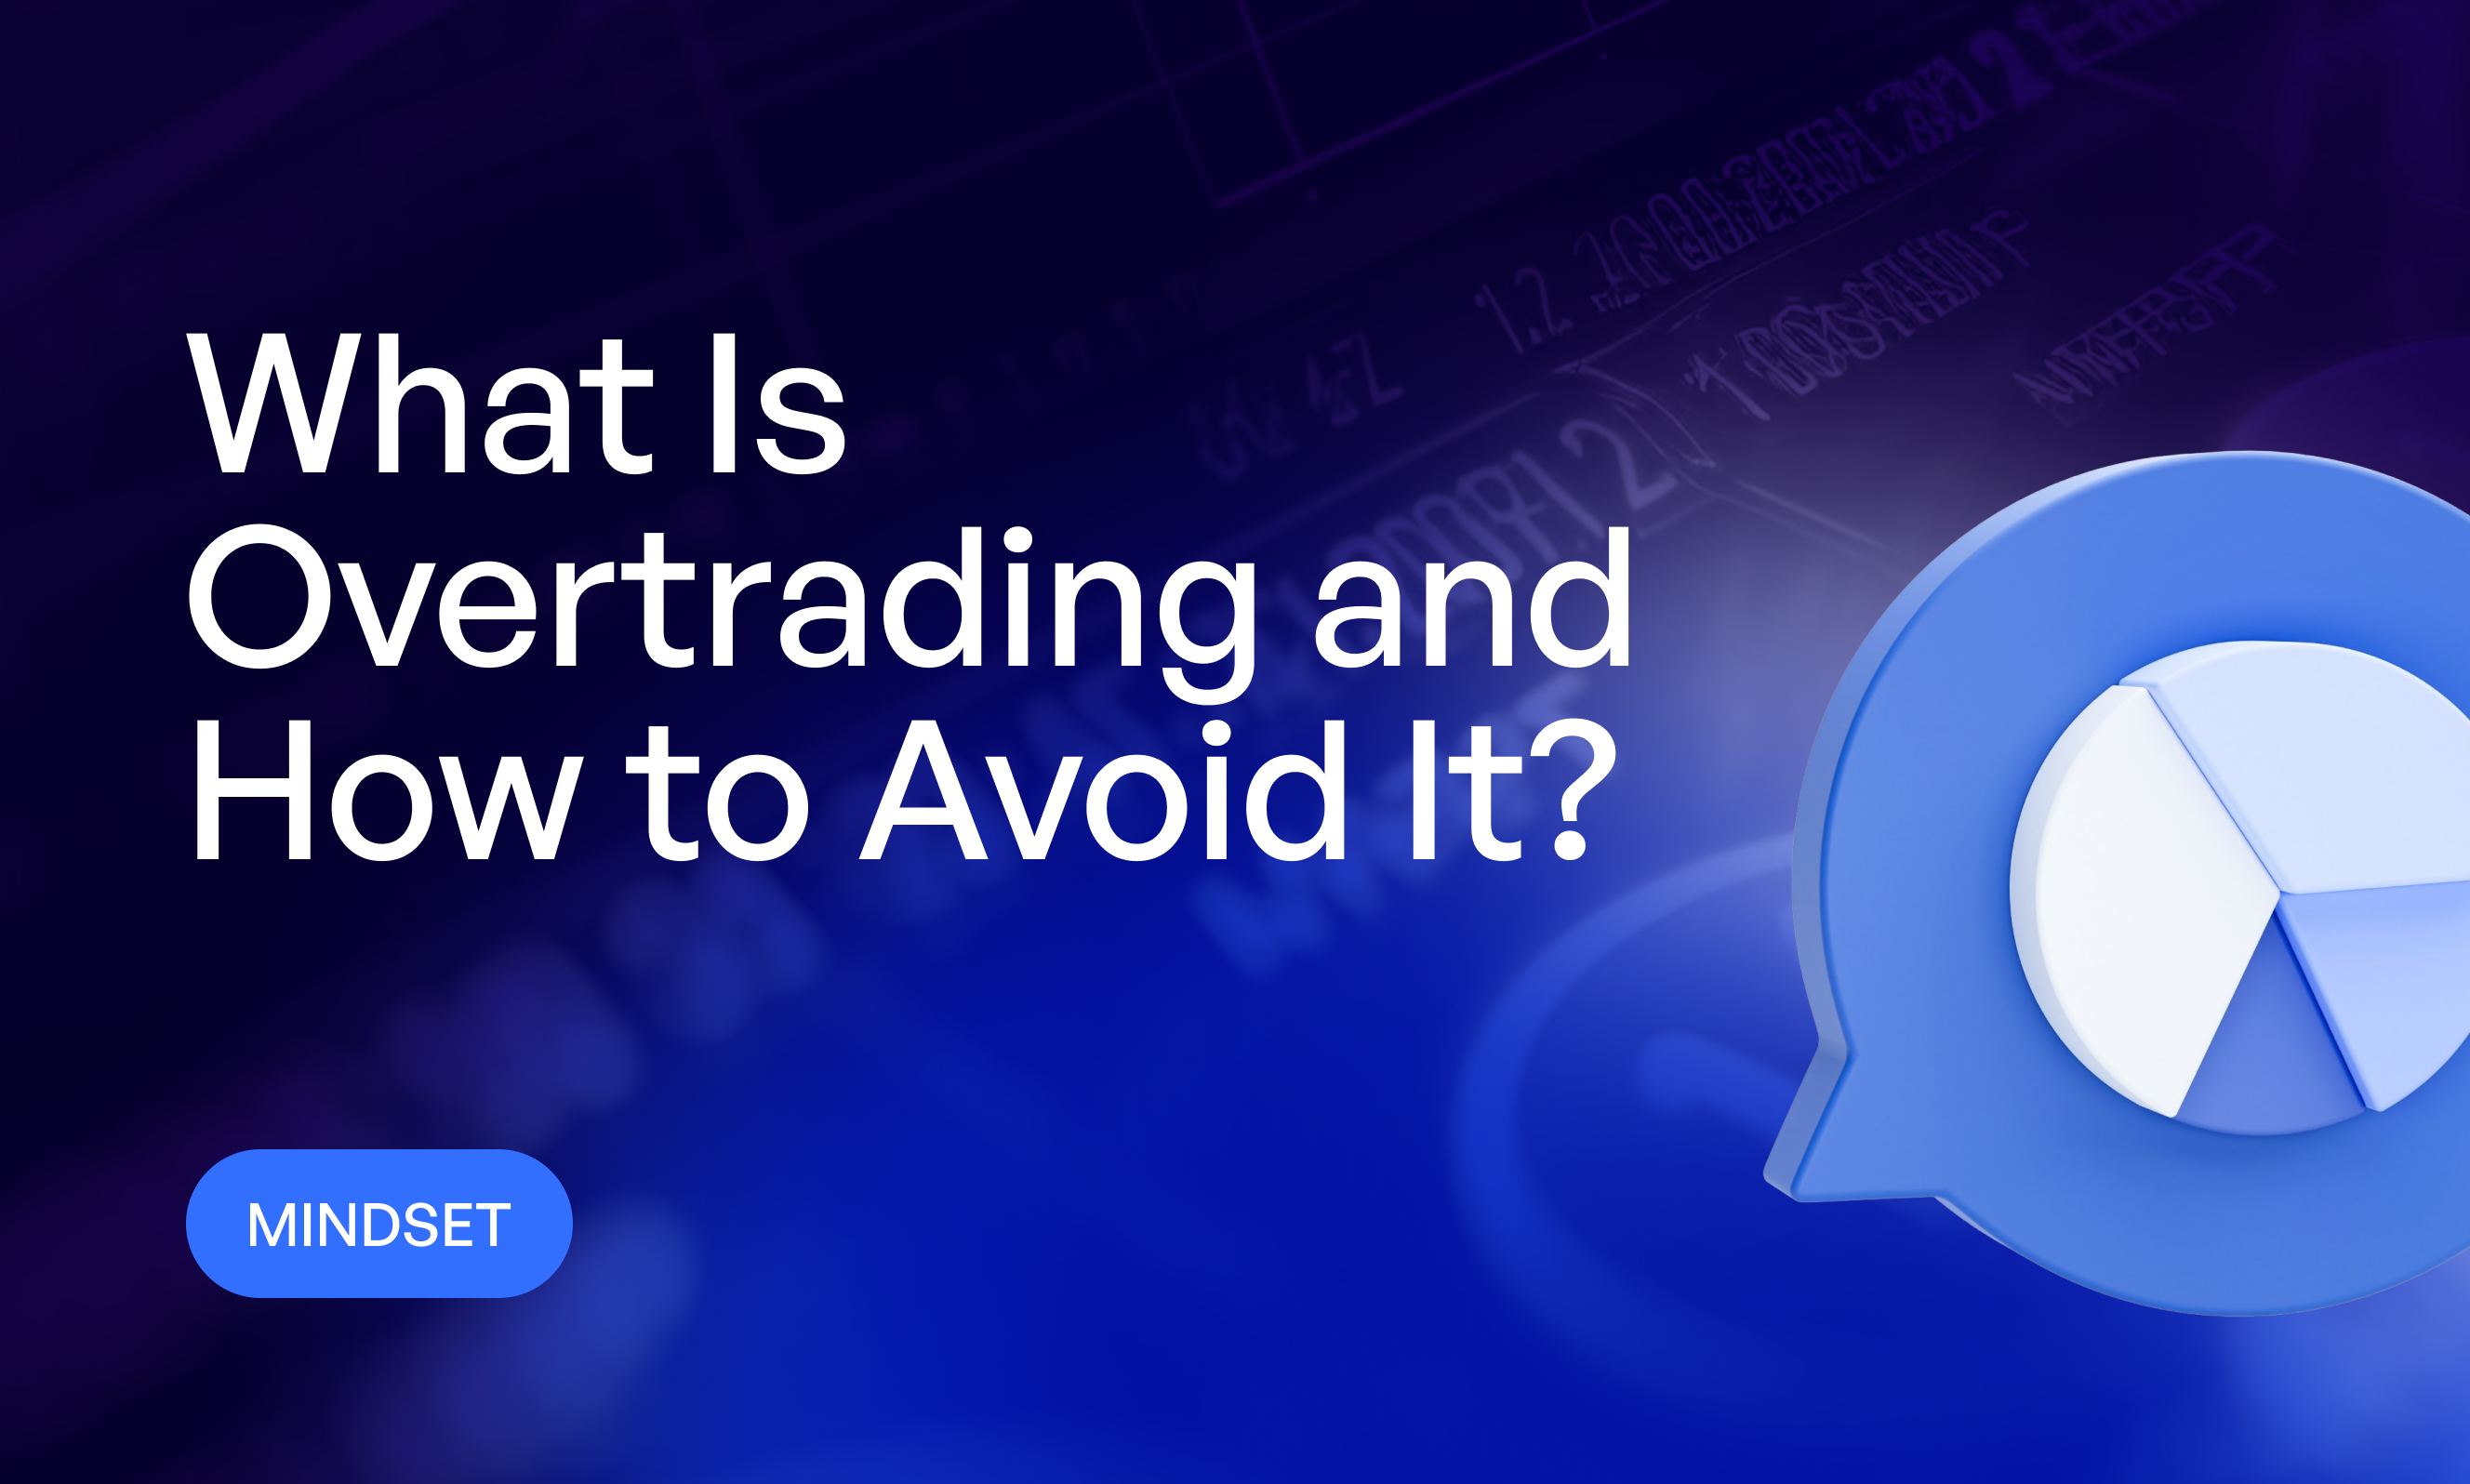 What Is Overtrading and How to Avoid It?